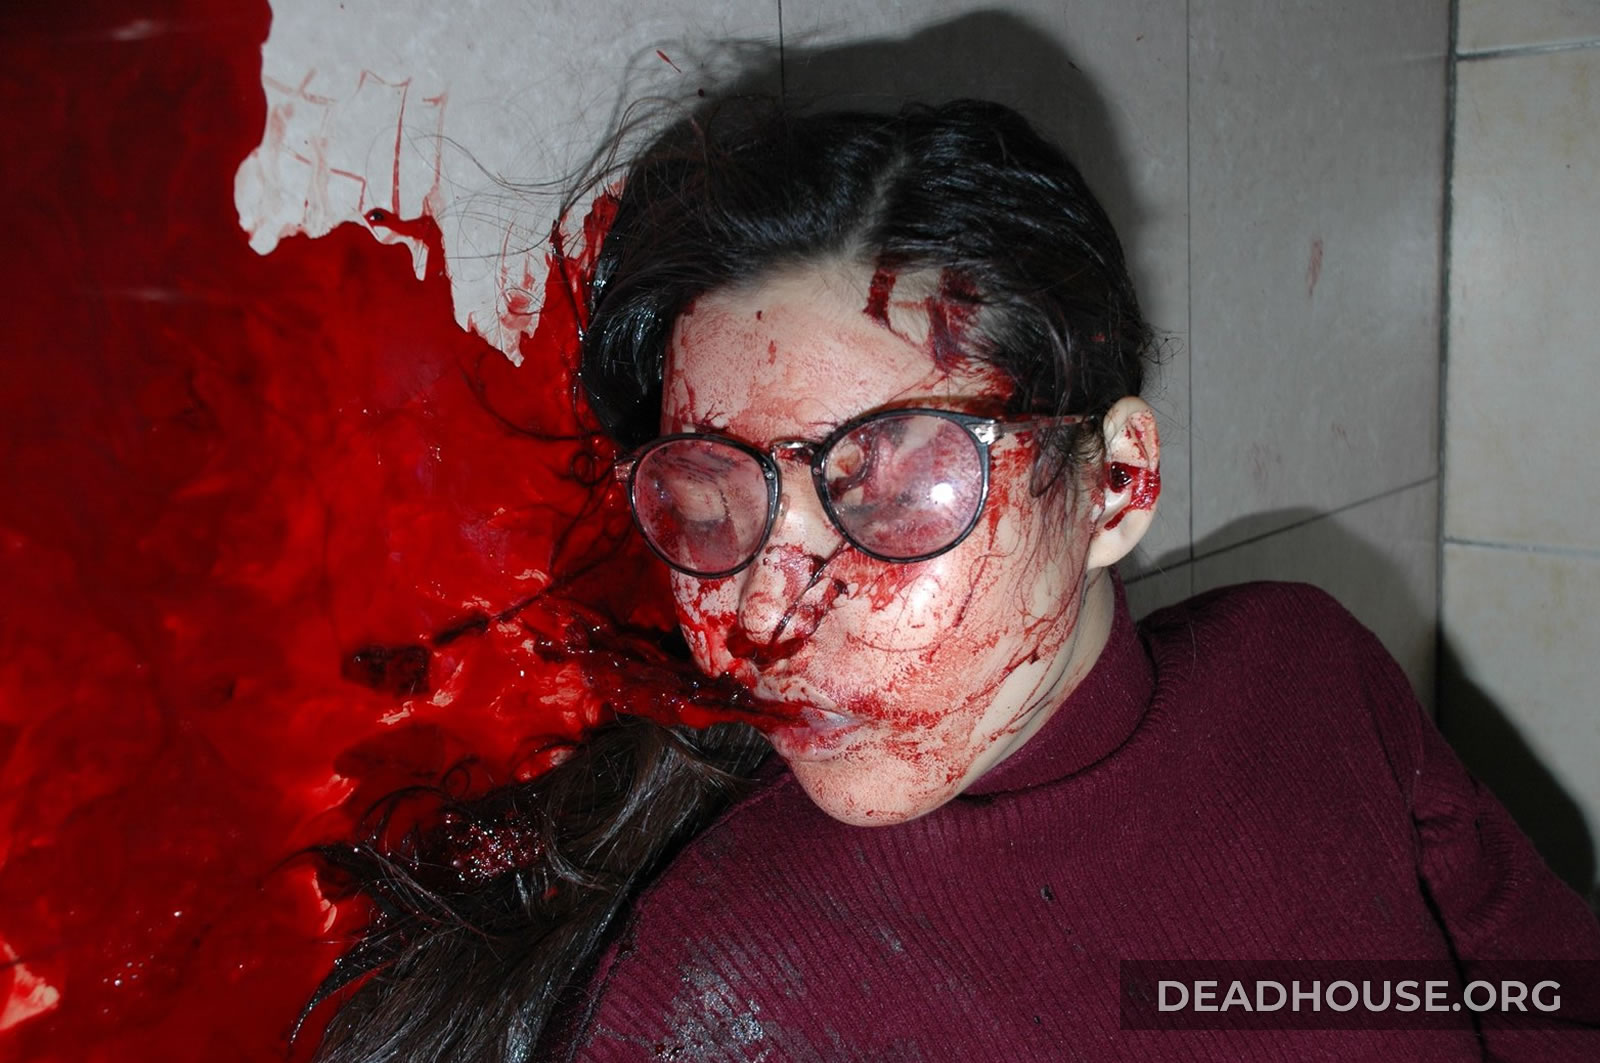 The corpse of a girl covered in blood